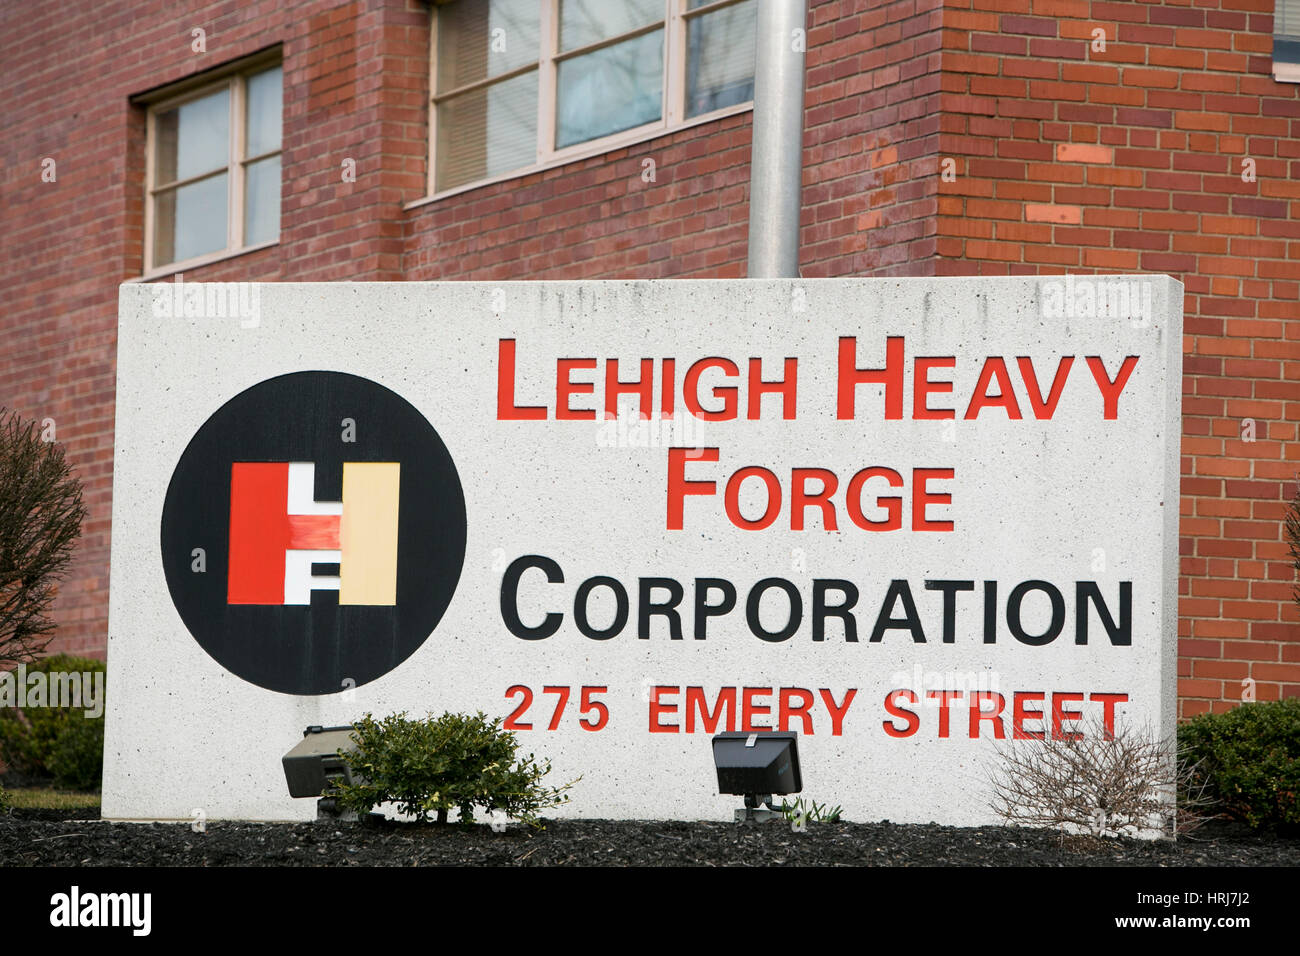 A logo sign outside of a facility occupied by the Lehigh Heavy Forge Corporation in Bethlehem, Pennsylvania on February 26, 2017. Stock Photo